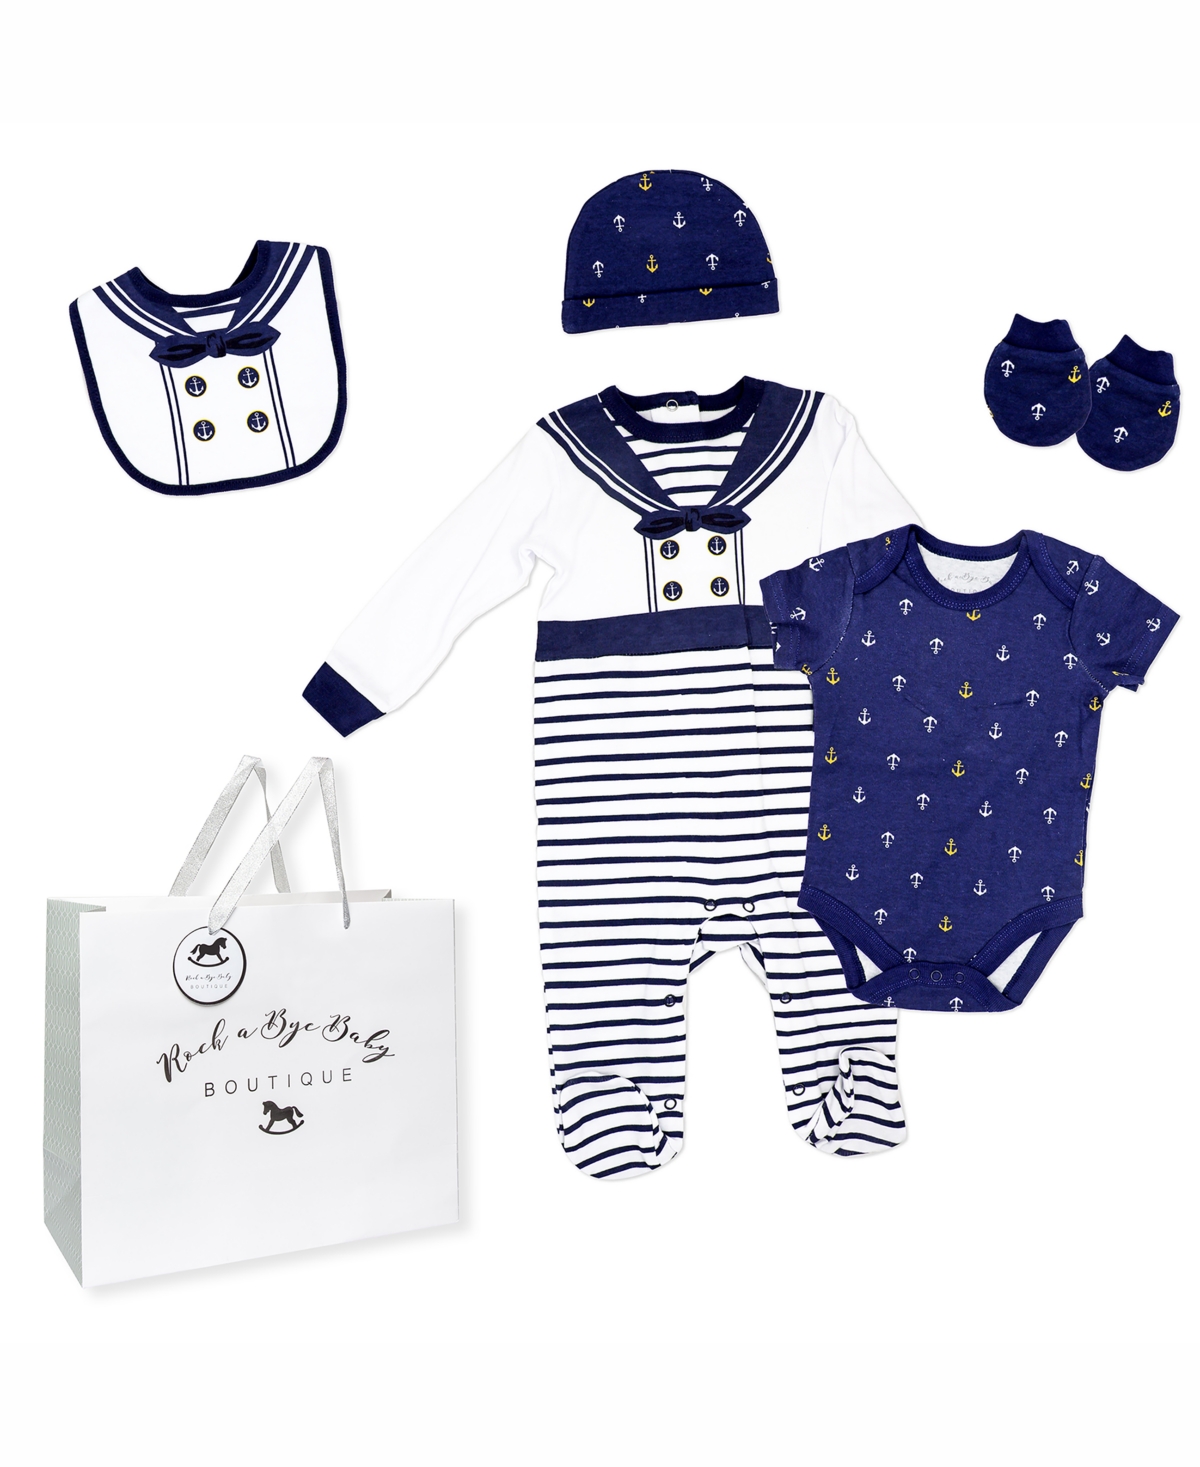 Rock-a-bye Baby Boutique Baby Boys Layette Gift Bag Set In Sailor